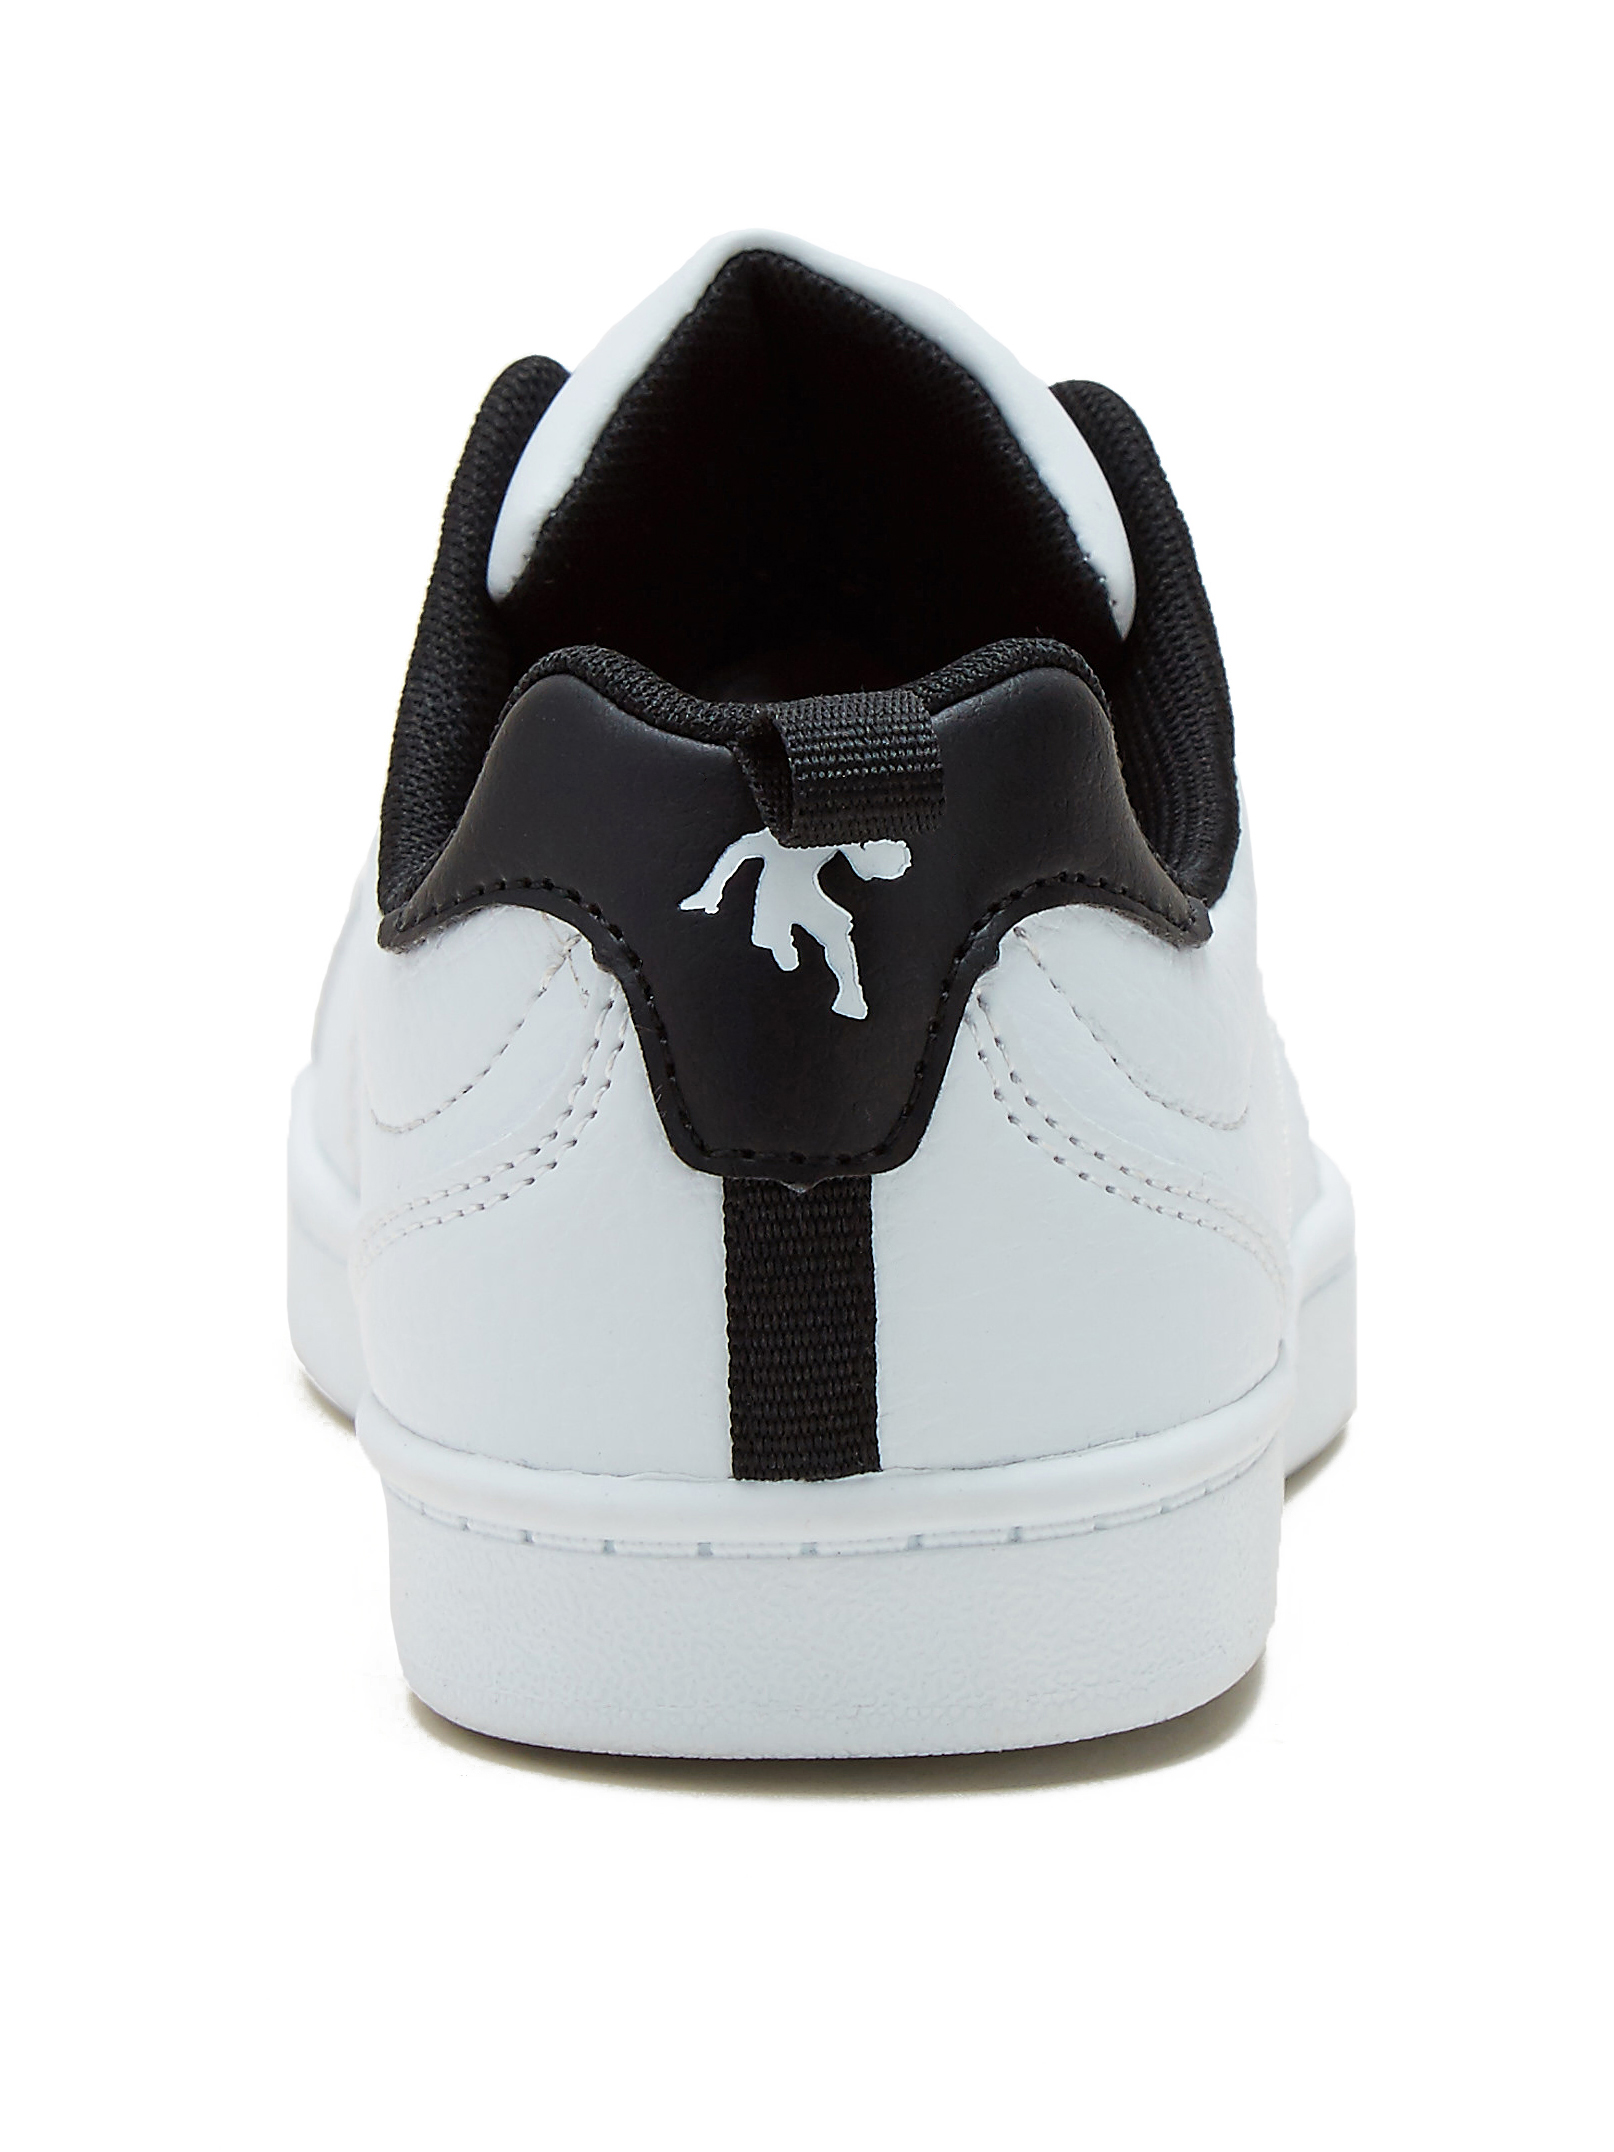 Boys' Meister Casual Court Shoe - image 4 of 5